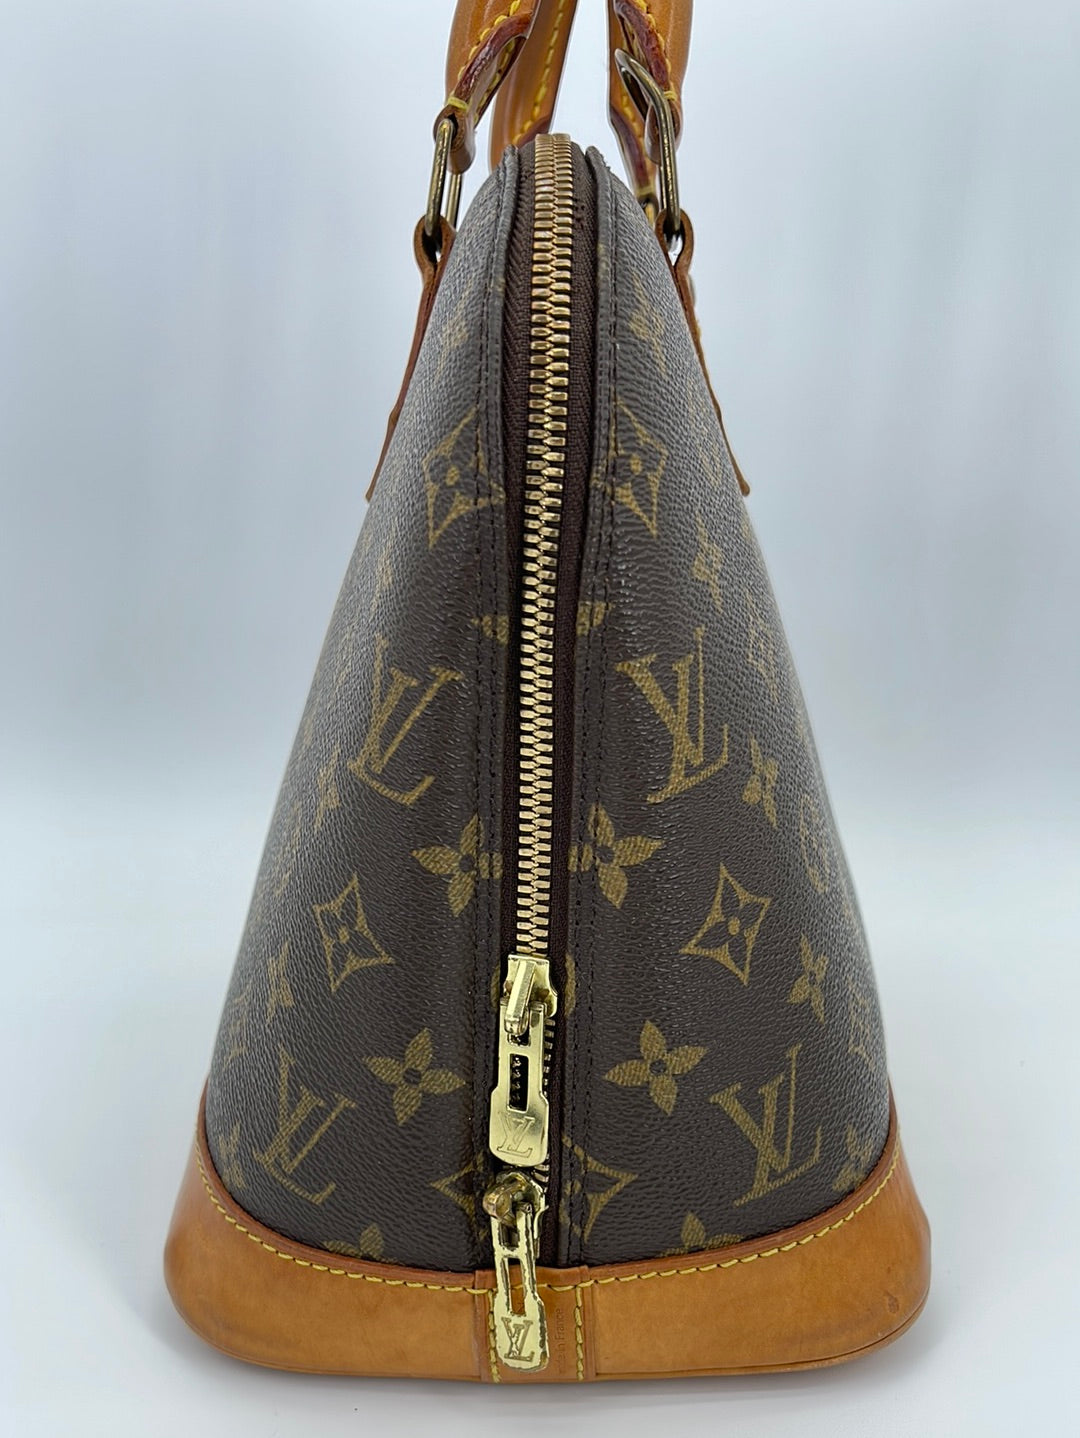 Sold at Auction: Louis Vuitton Alma PM With Shoulder Strap. 32cm W x 25cmH  x 16D. Comes With Original Packaging, Dust Bag. Certificate of  Authenticity. Free Express Delivery With Insurance Aus Wide.